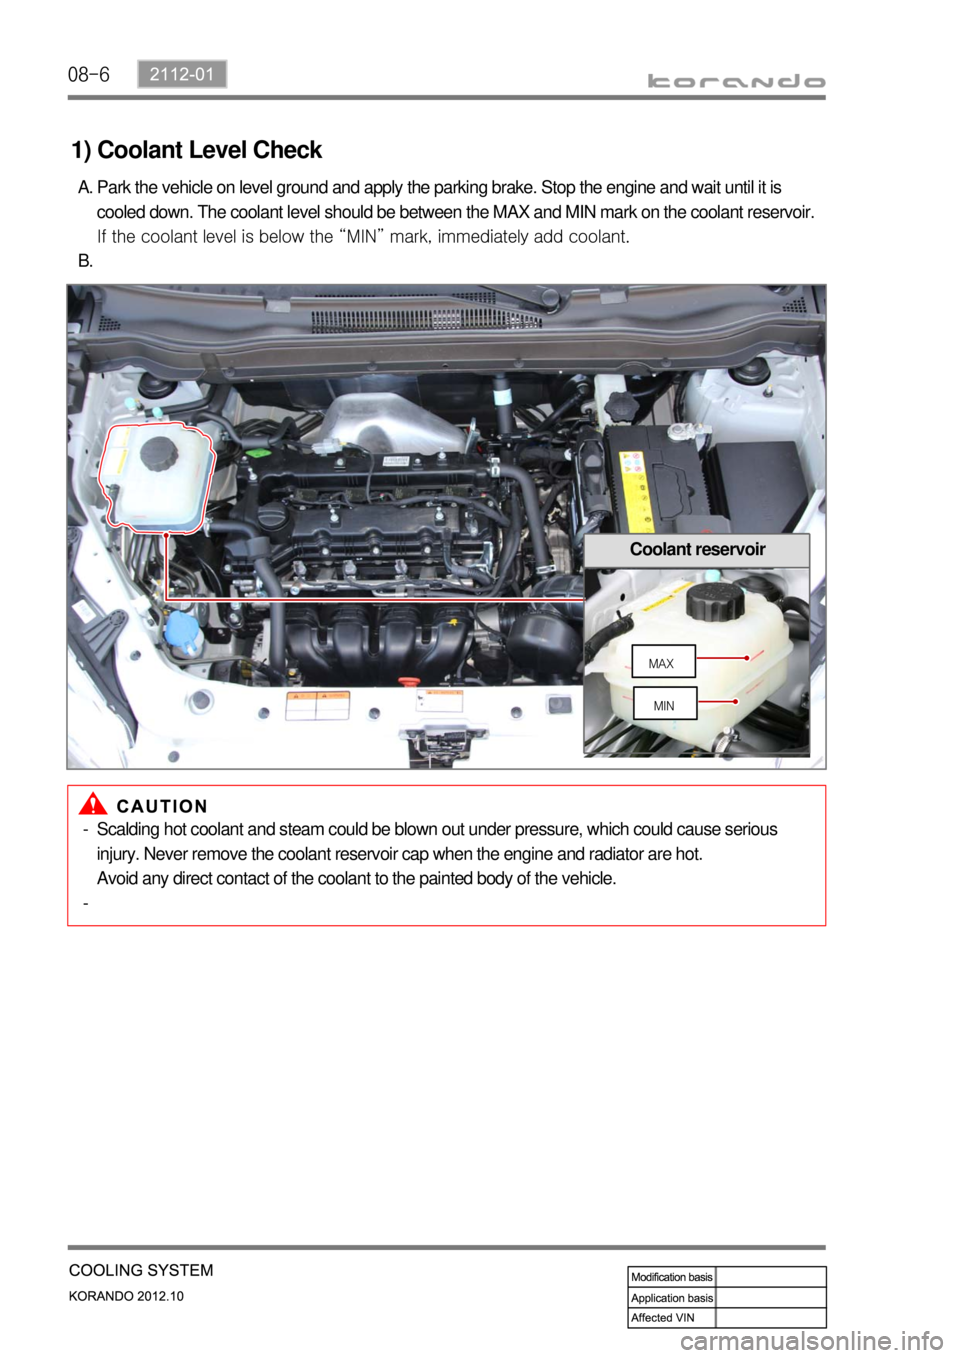 SSANGYONG KORANDO 2012  Service Manual 08-6
1) Coolant Level Check
Park the vehicle on level ground and apply the parking brake. Stop the engine and wait until it is 
cooled down. The coolant level should be between the MAX and MIN mark on